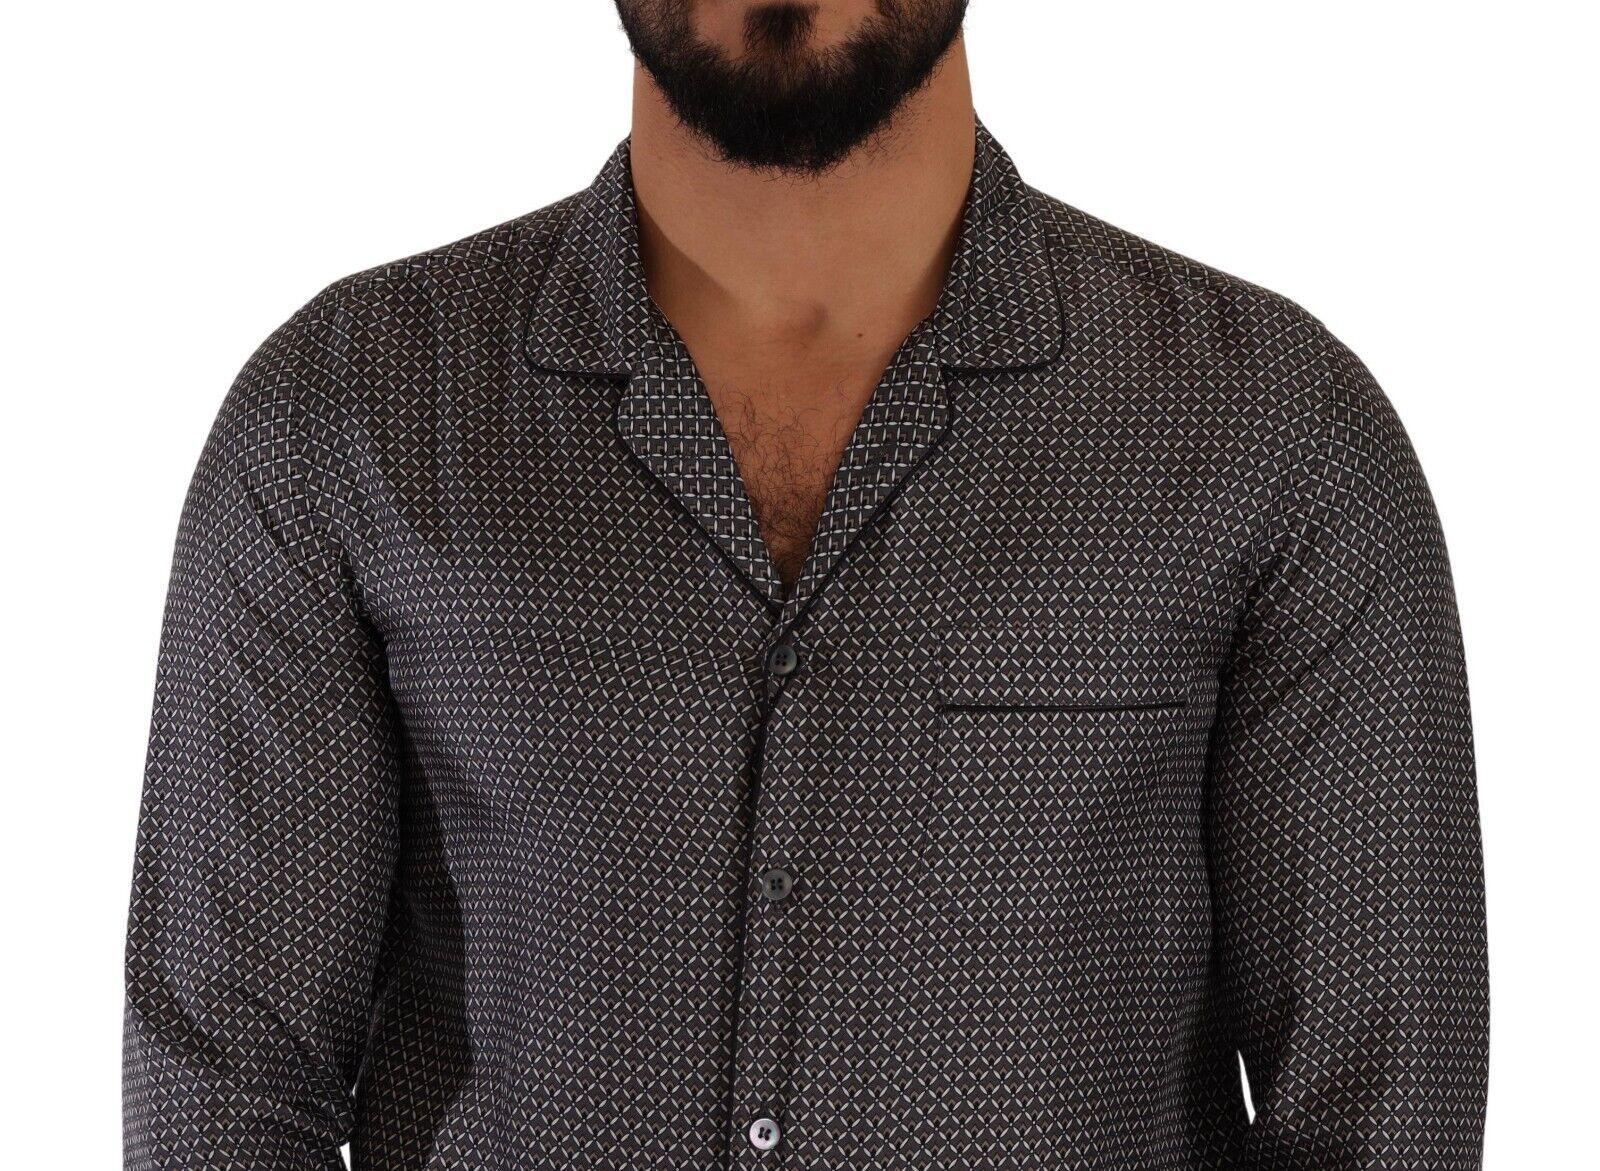 Gray Fantasy Pattern Pajama Top Mens Shirt - Designed by Dolce & Gabbana Available to Buy at a Discounted Price on Moon Behind The Hill Online Designer Discount Store